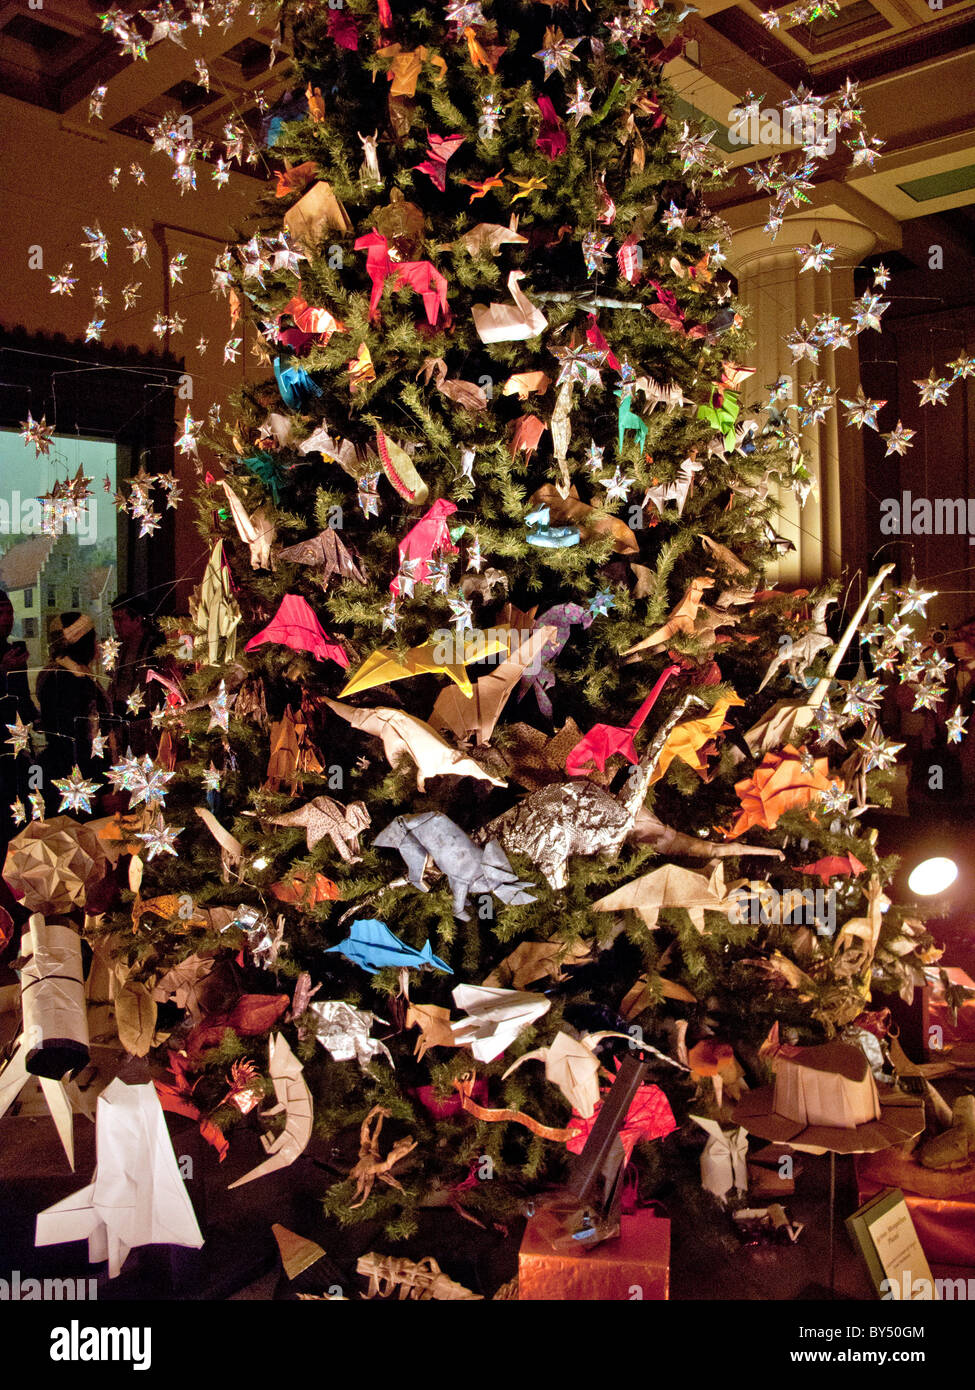 A Christmas Tree Decorated With Folded Paper Origami Images